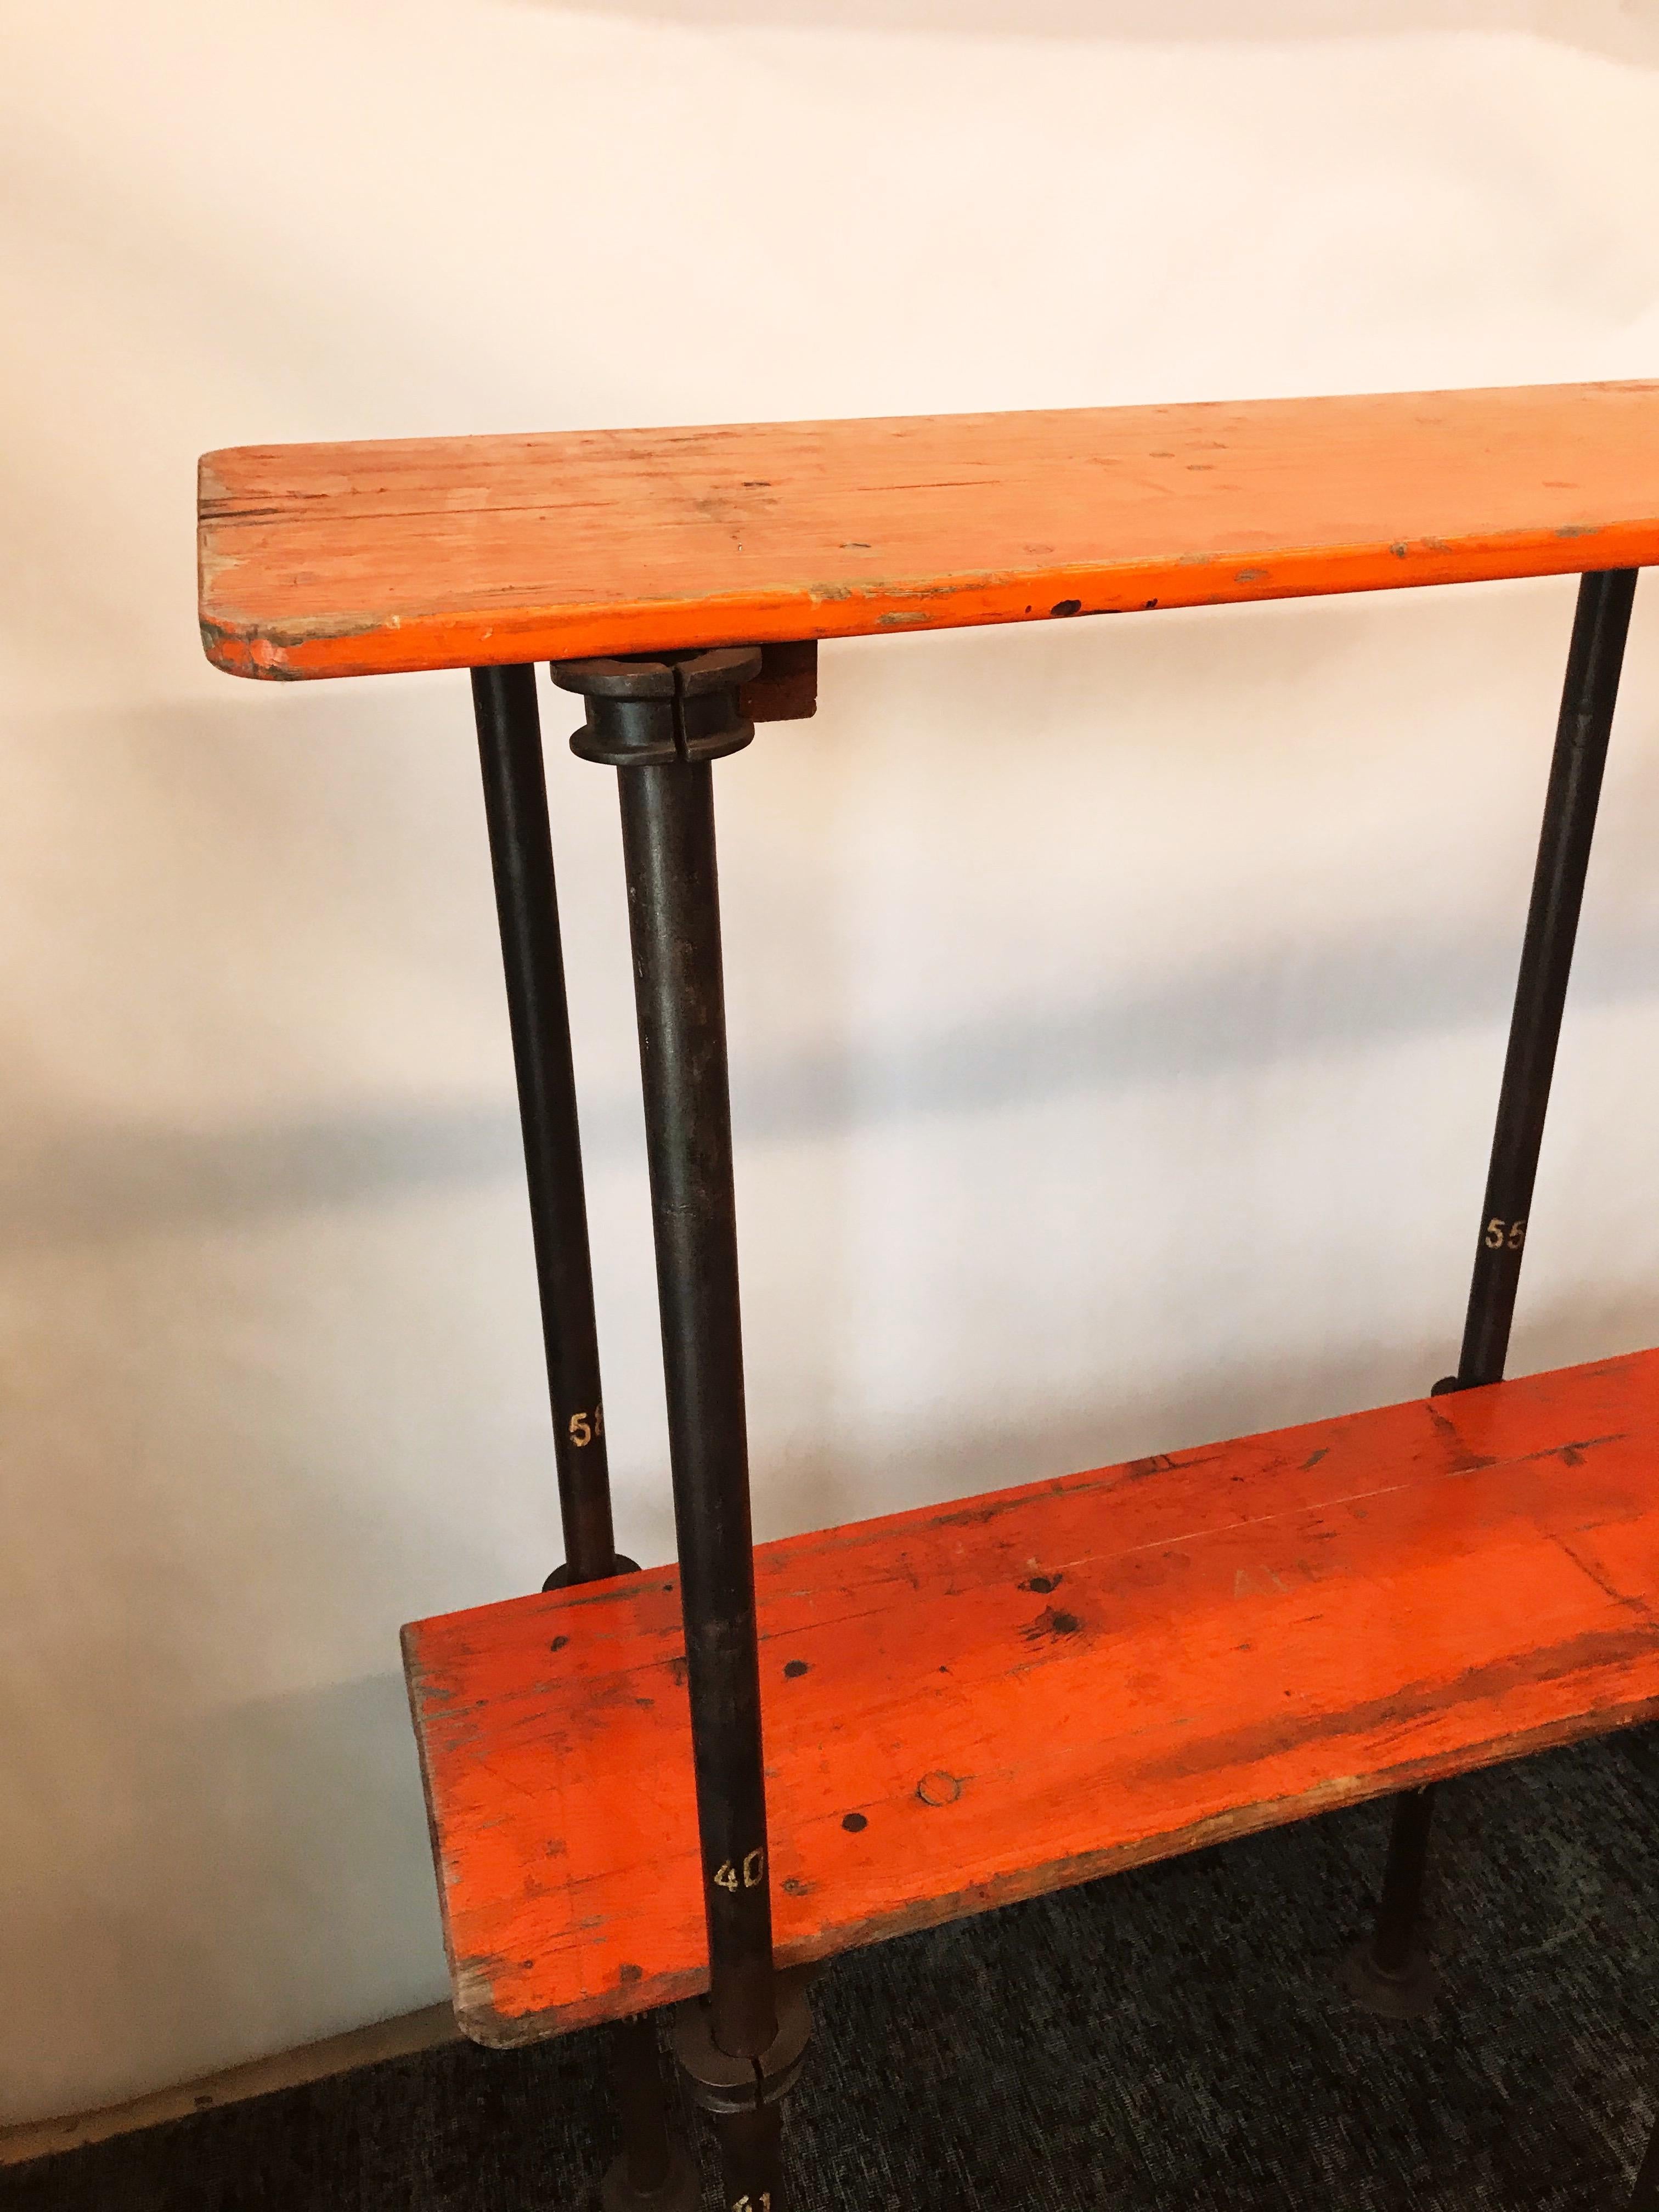 This vintage Industrial German shelving unit is in overall great condition. Bright orange painted wood planks. Great patina. Breaks down easily for shipping.
circa 1930s.
Dimensions:
87